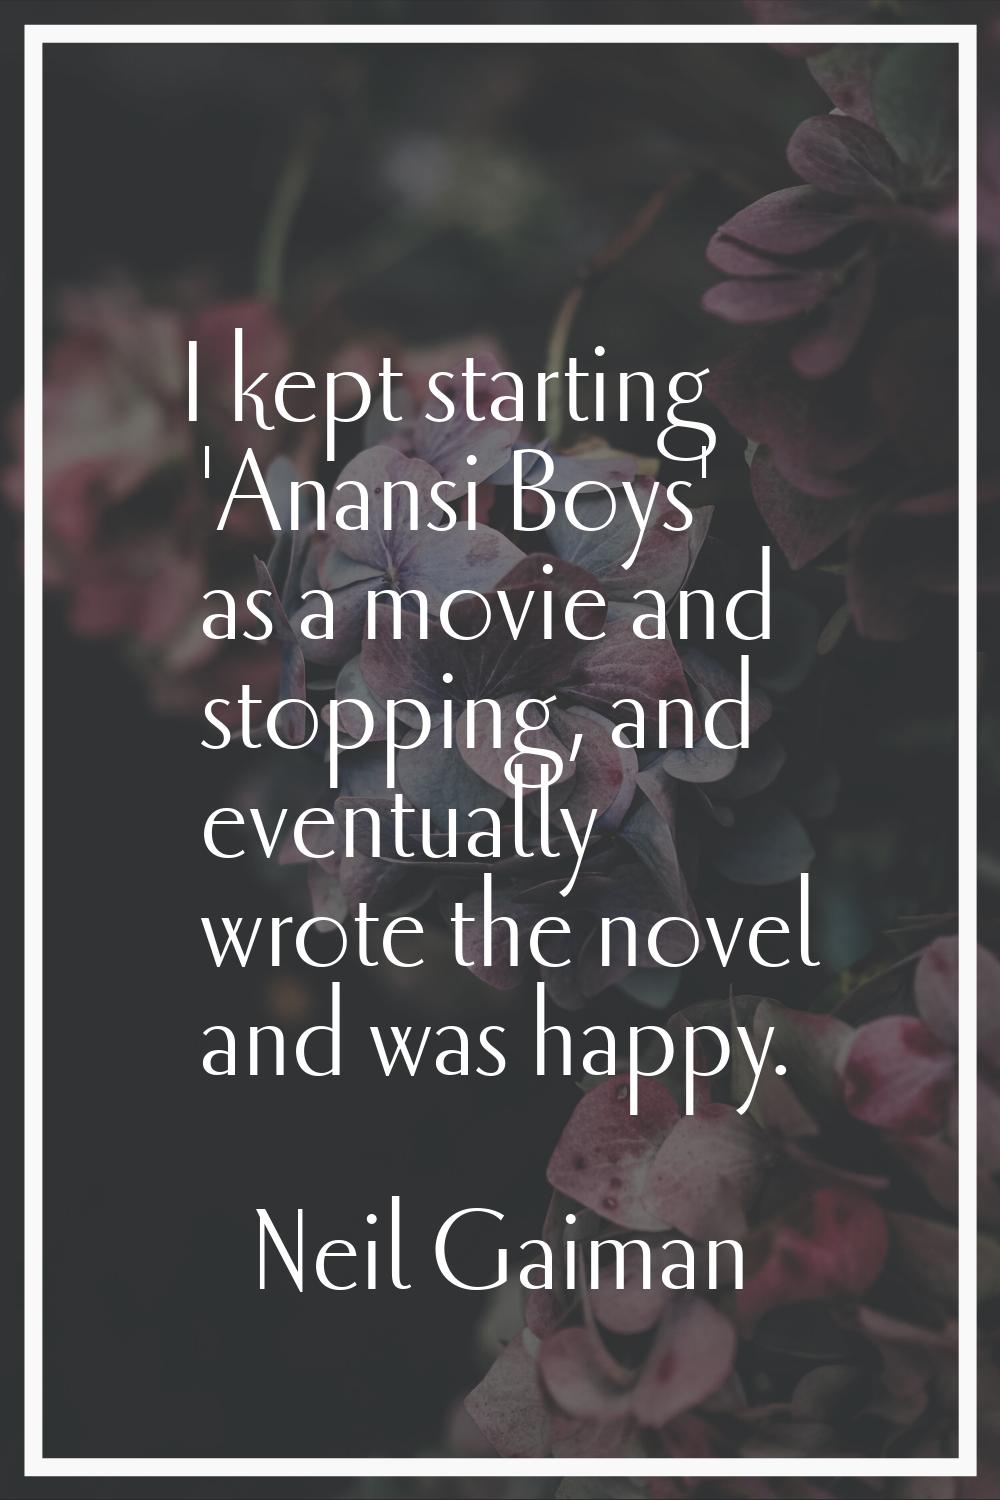 I kept starting 'Anansi Boys' as a movie and stopping, and eventually wrote the novel and was happy